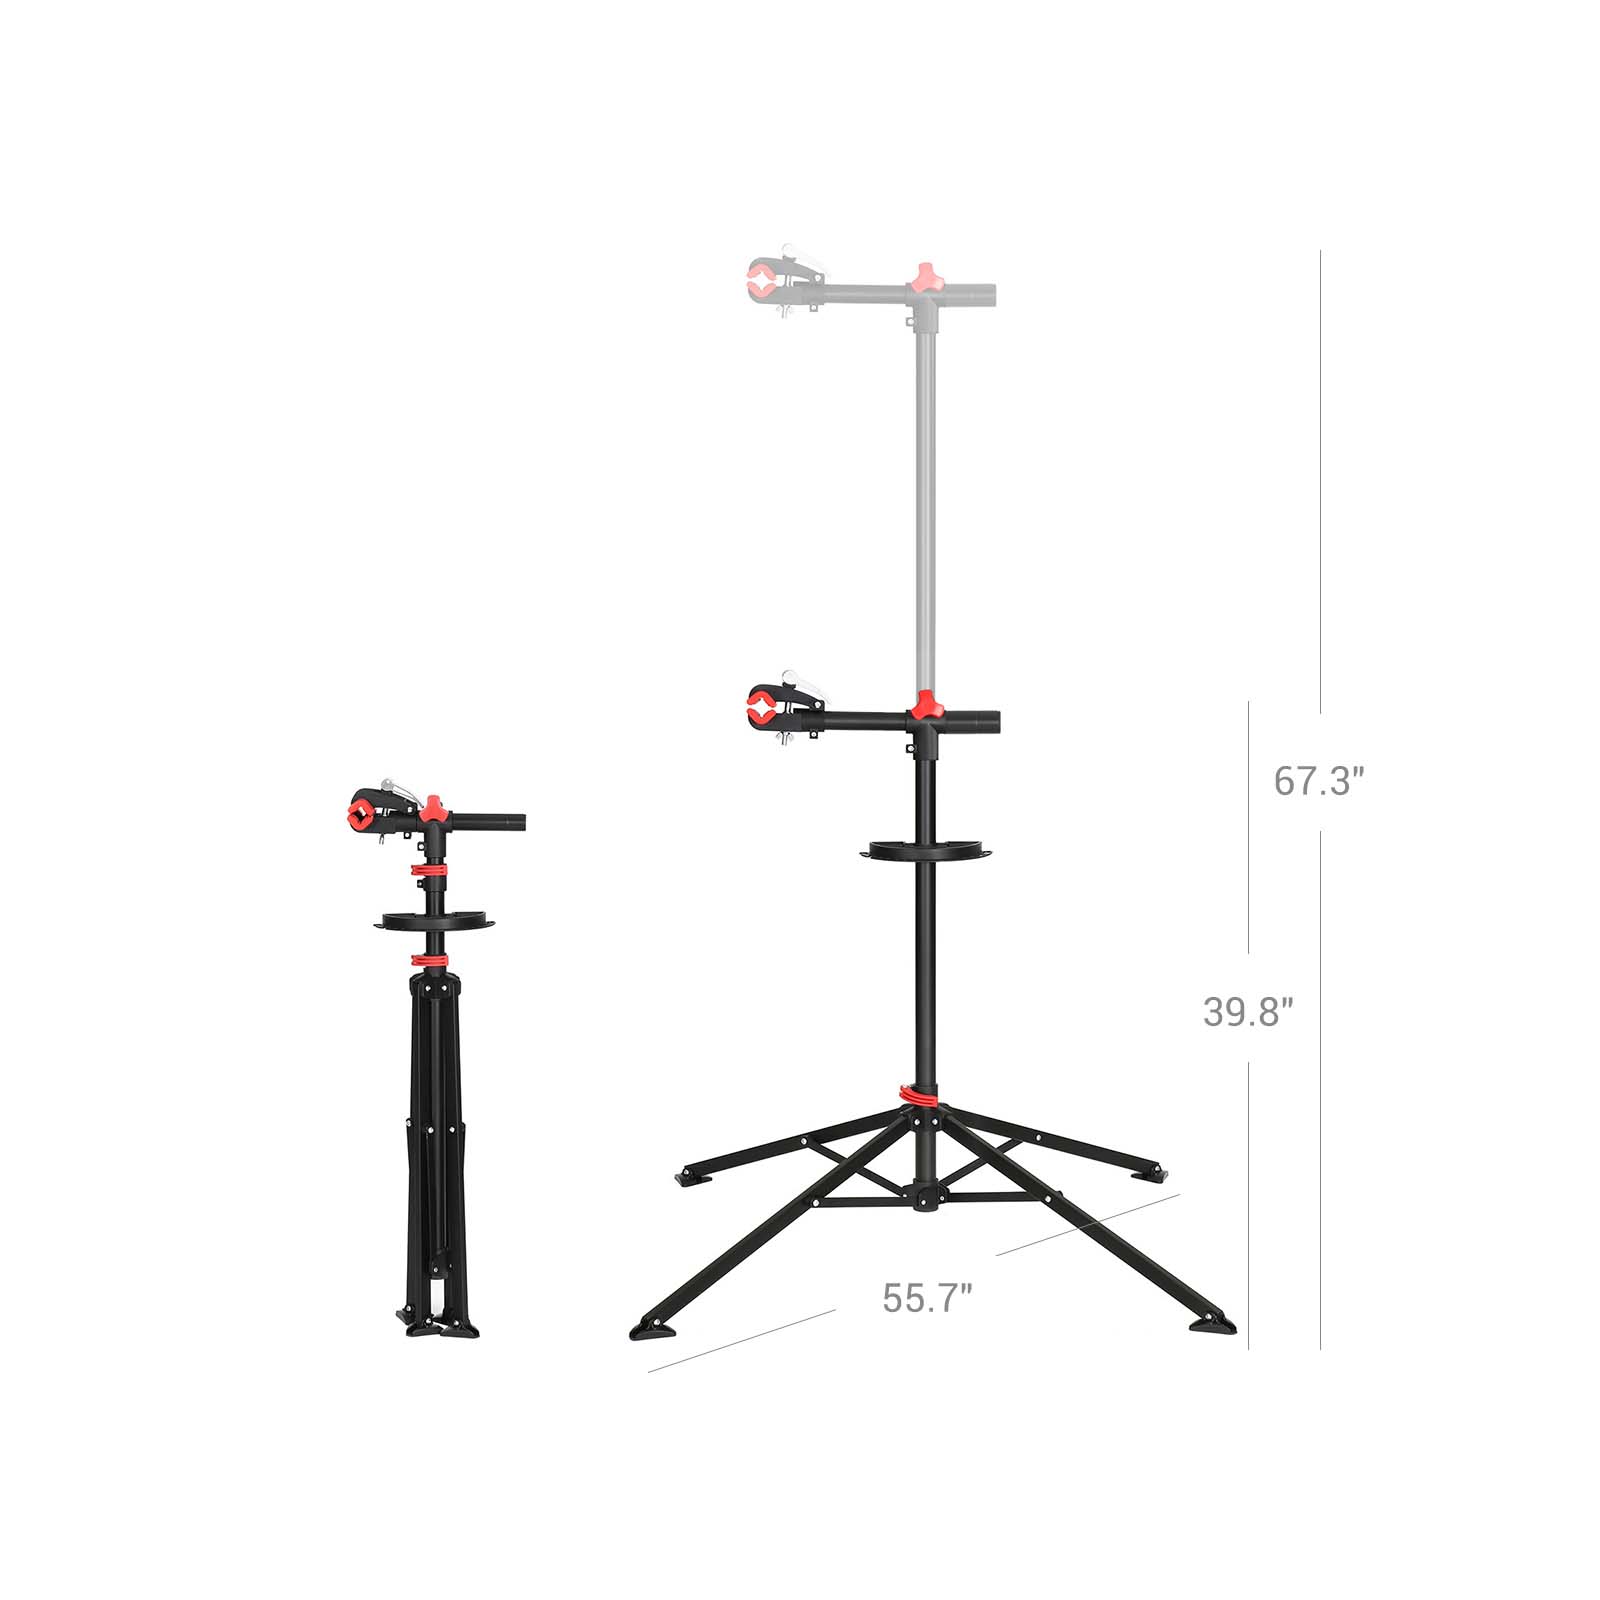 SONGMICS Bike Repair Stand with Multiple Quick Release Design USBR06B